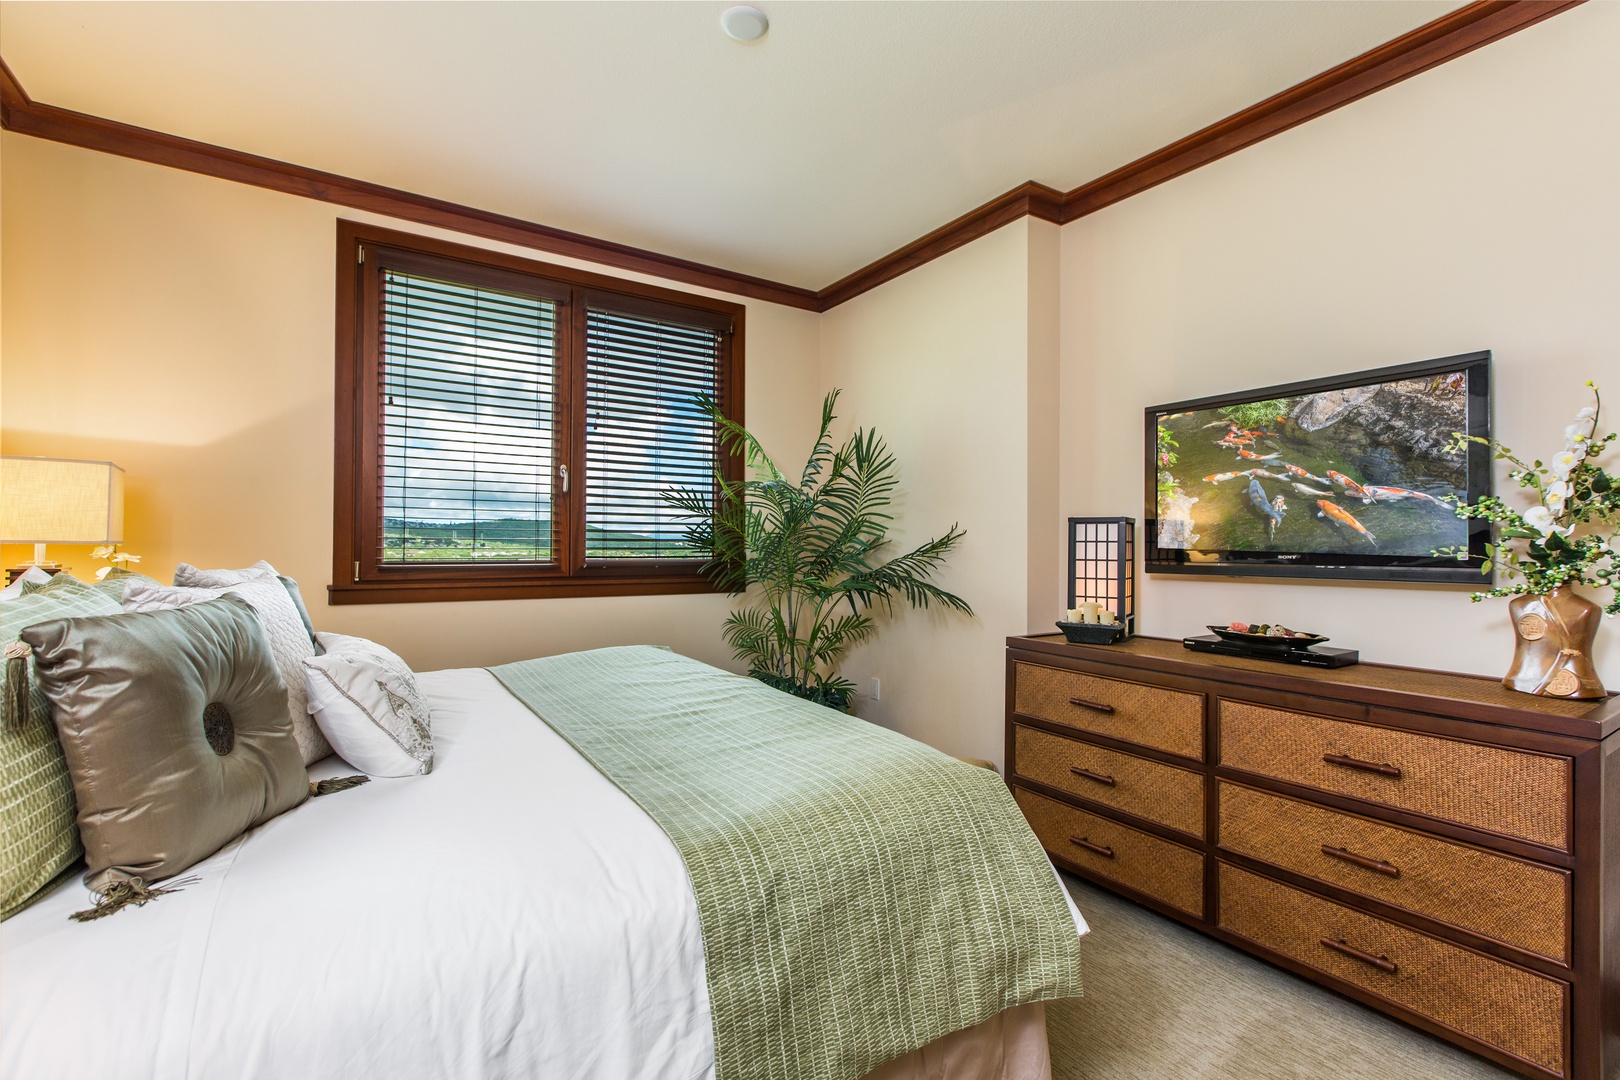 Master bedroom features a king bed